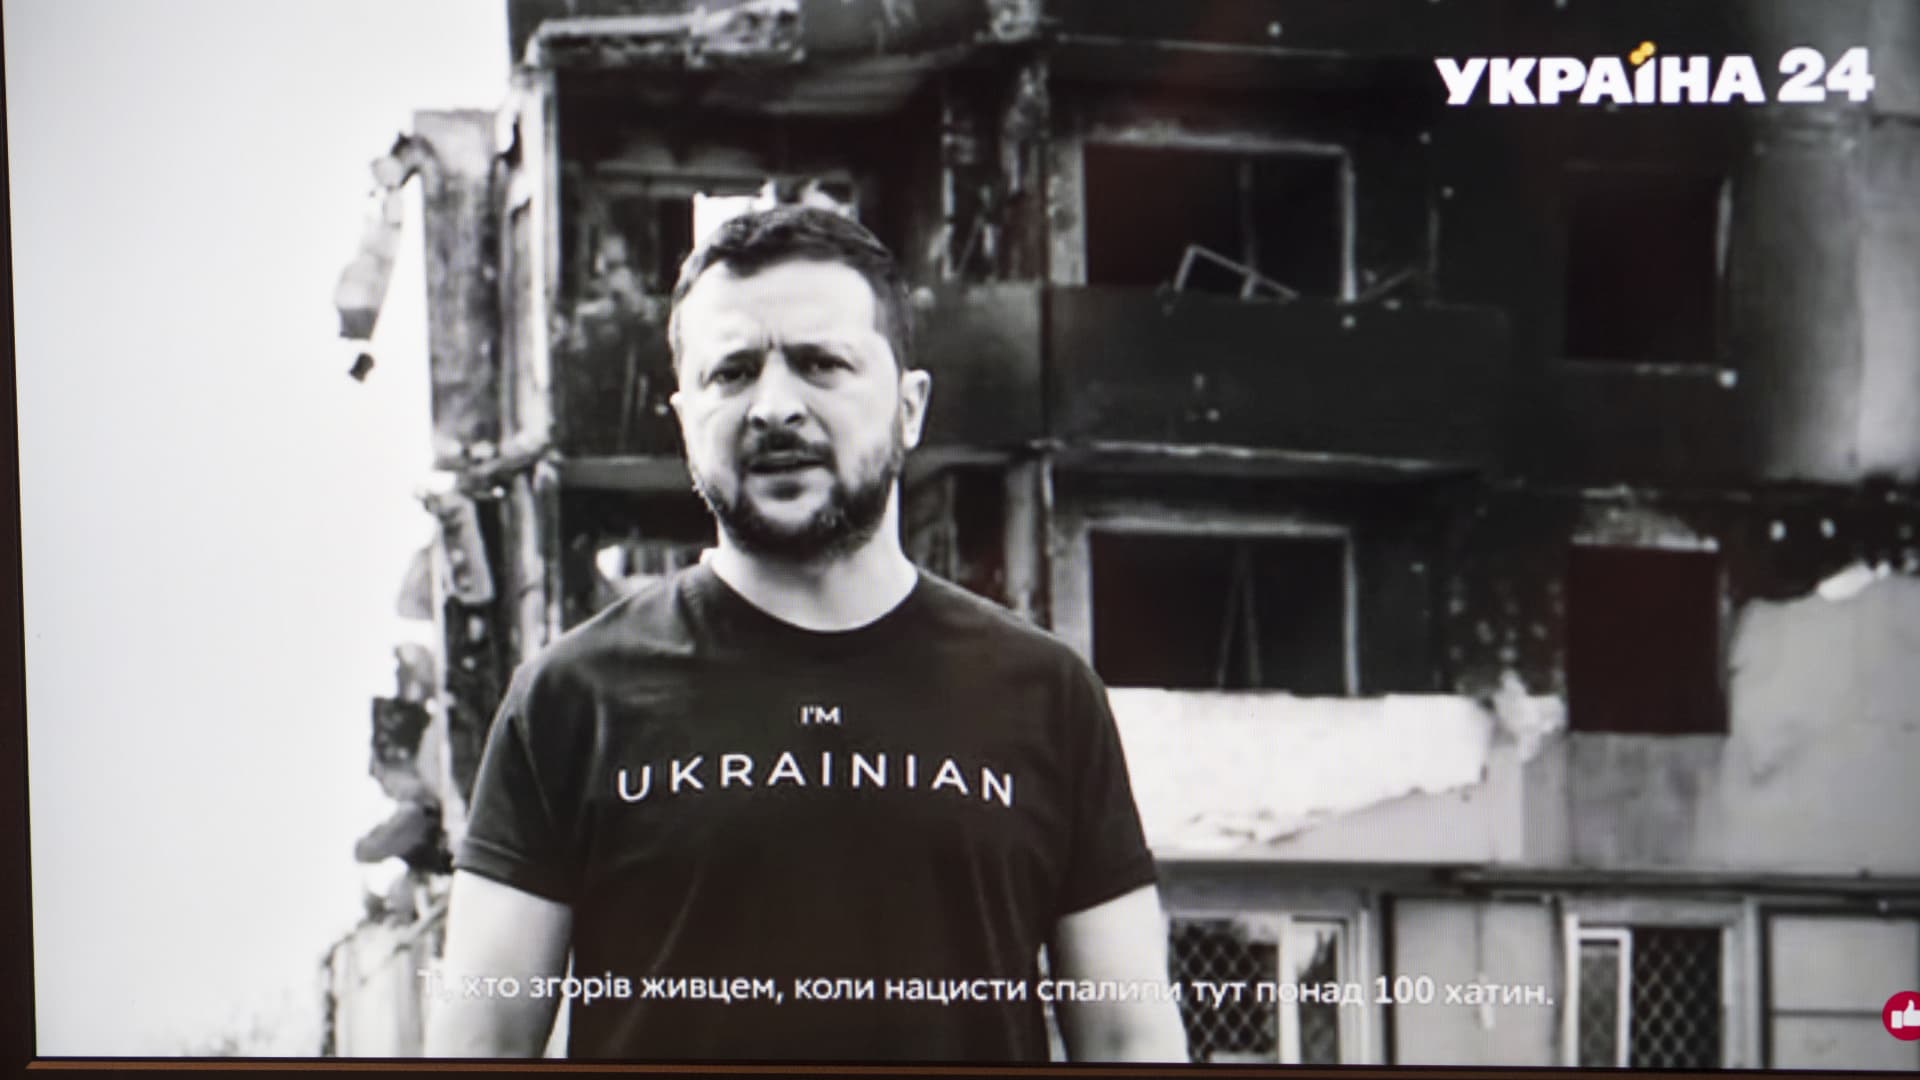 A screen grab of President of Ukraine Volodymyr Zelenskyy's address on the occasion of the Day of Remembrance and Reconciliation in Borodyanka near Kyiv against the backdrop of a house destroyed by Russian invaders.